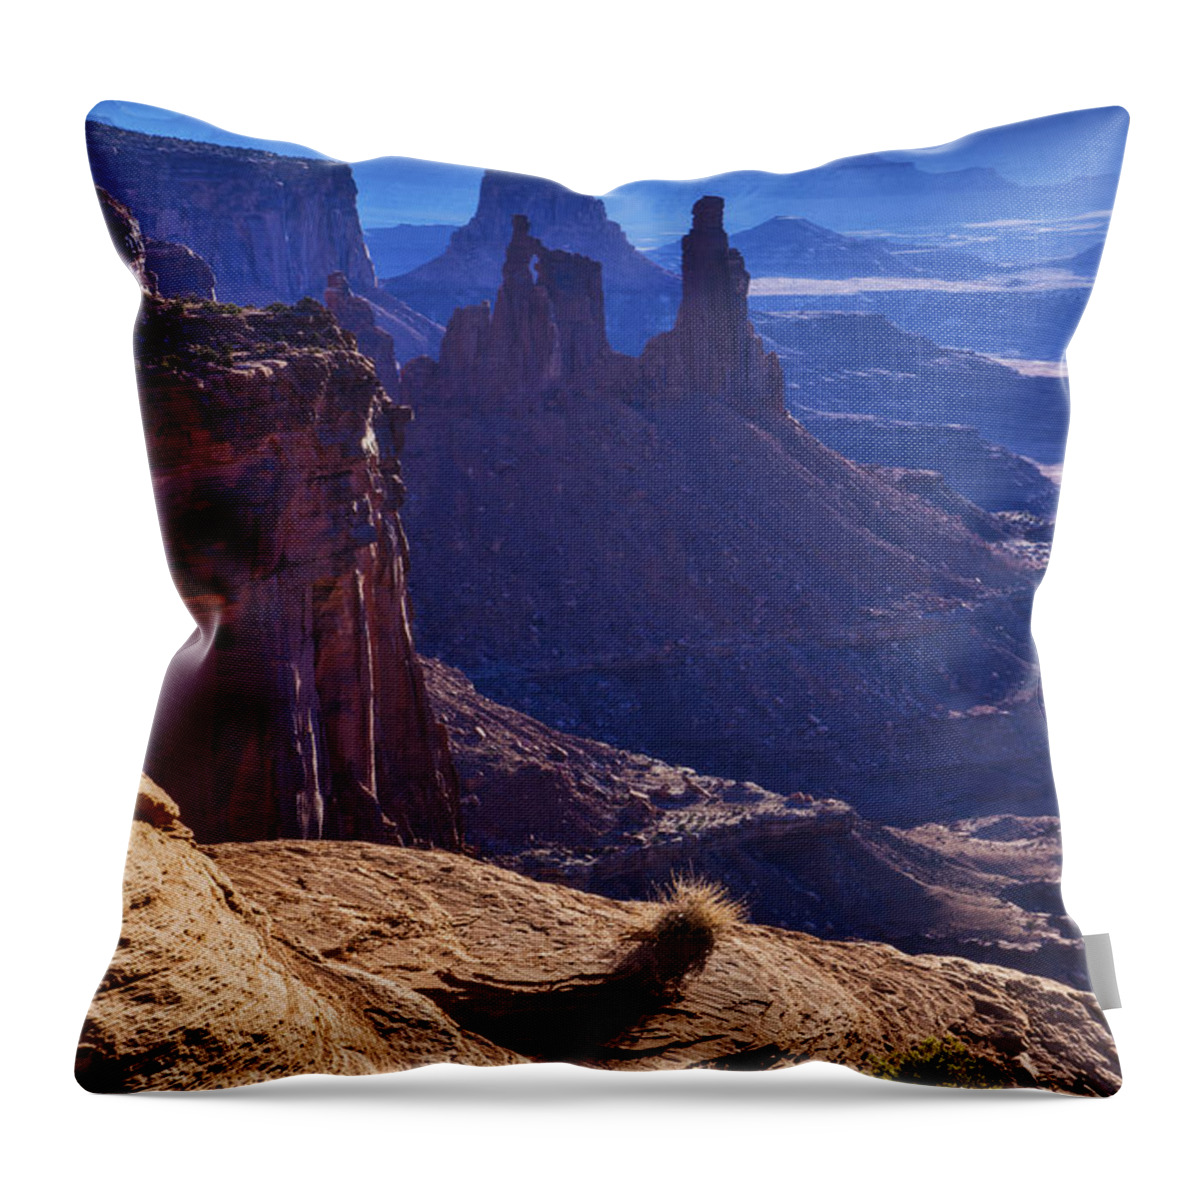 Tower Sunrise Throw Pillow featuring the photograph Tower Sunrise by Chad Dutson